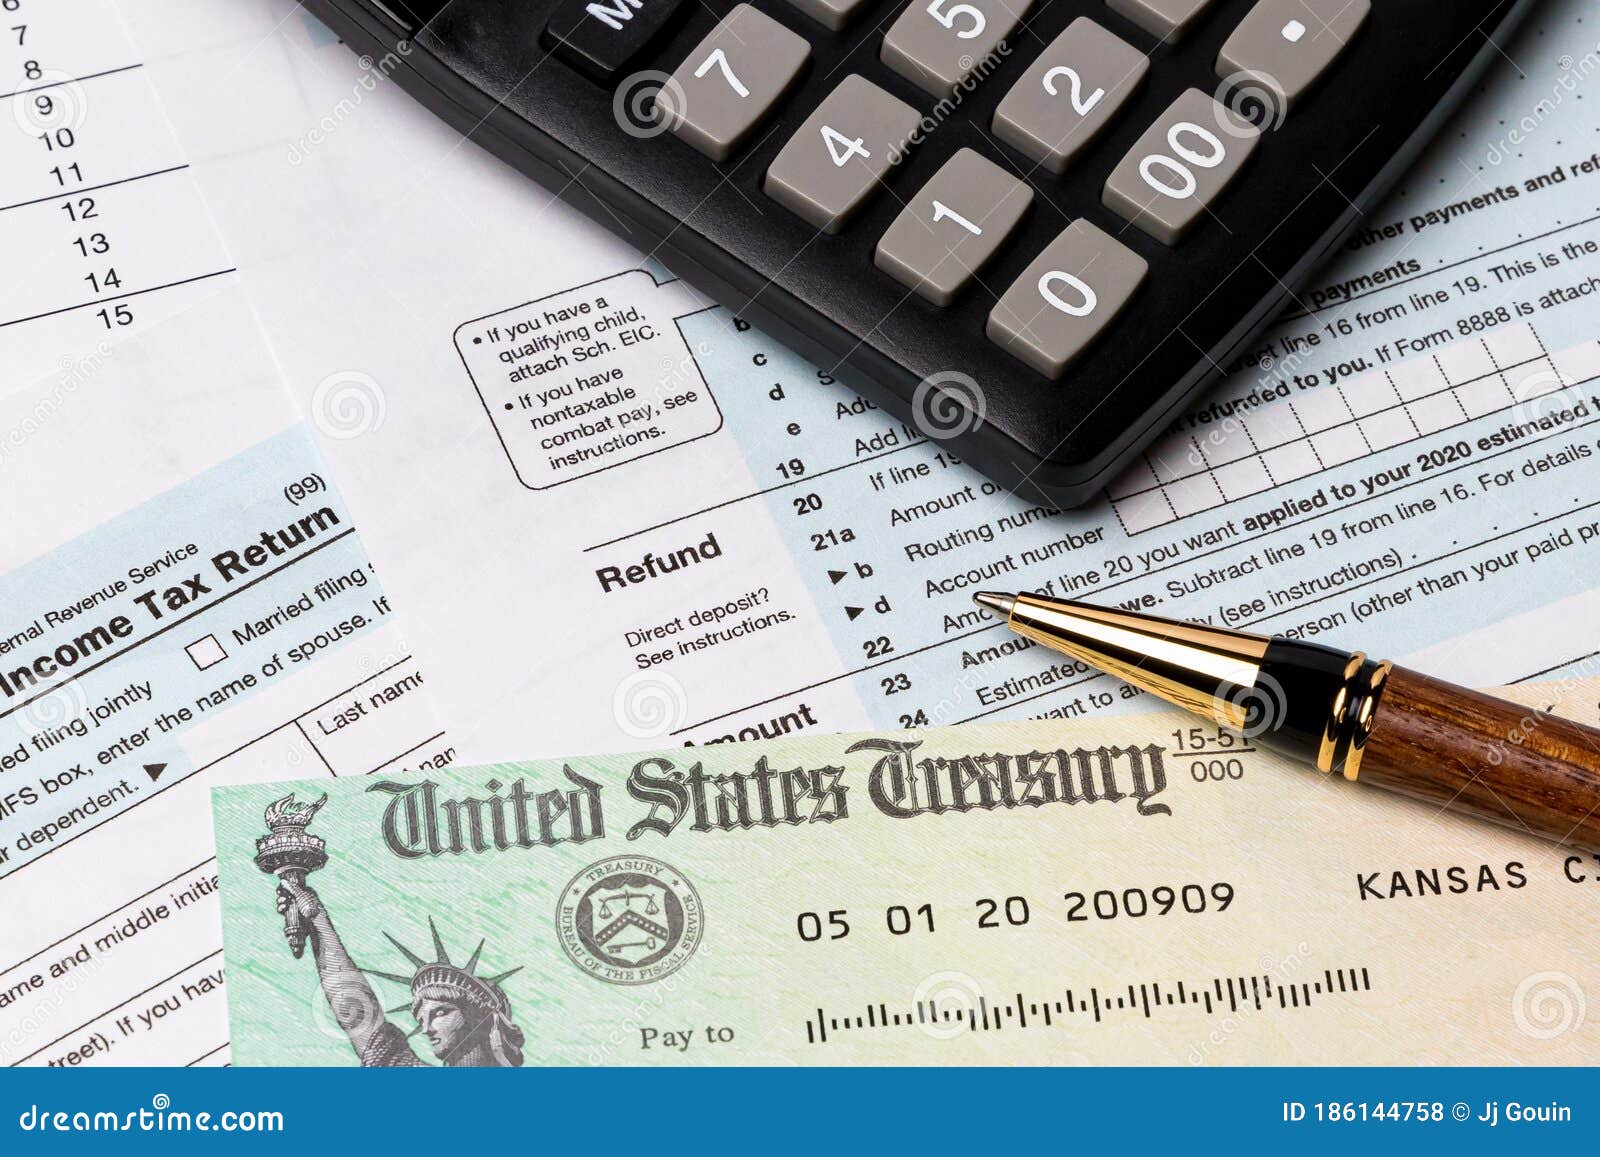 1040-individual-income-tax-return-form-2019-with-treasury-refund-check